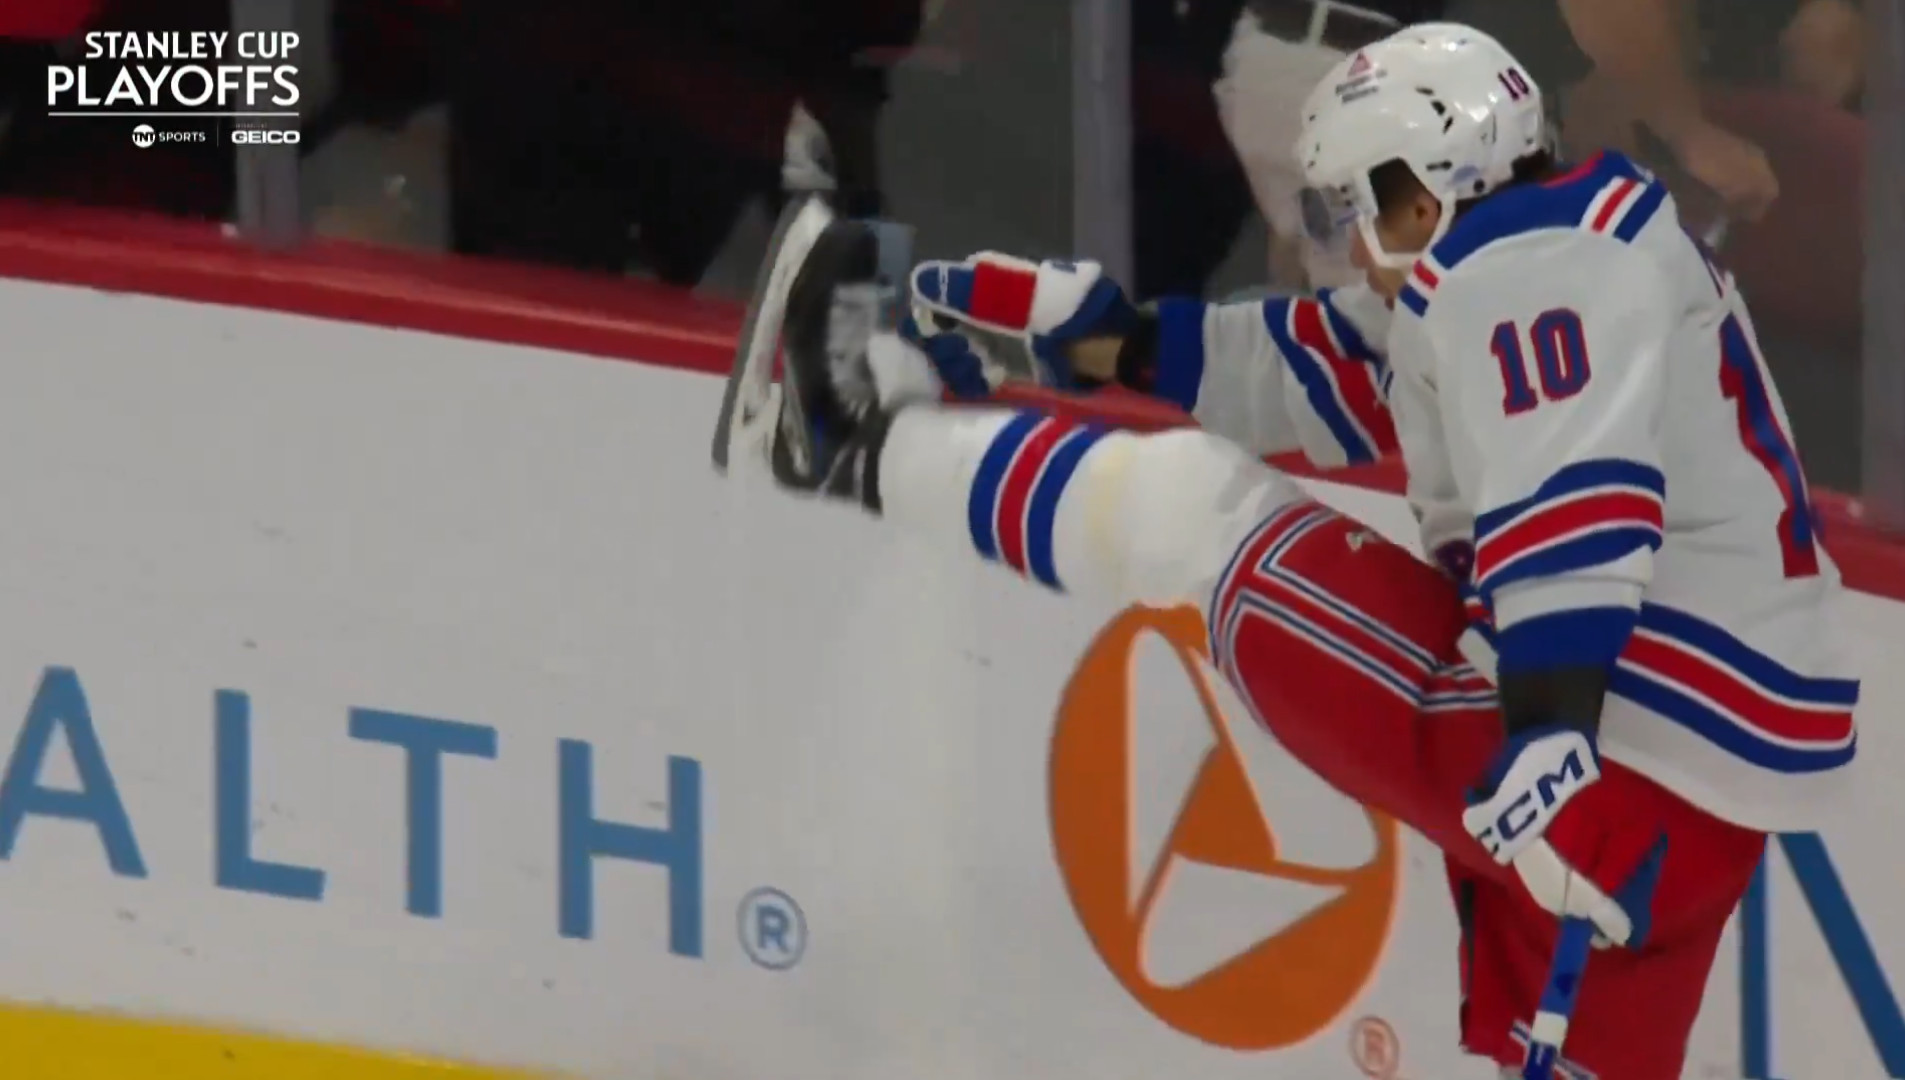 Panarin plays the hero… and the Rangers seem unstoppable